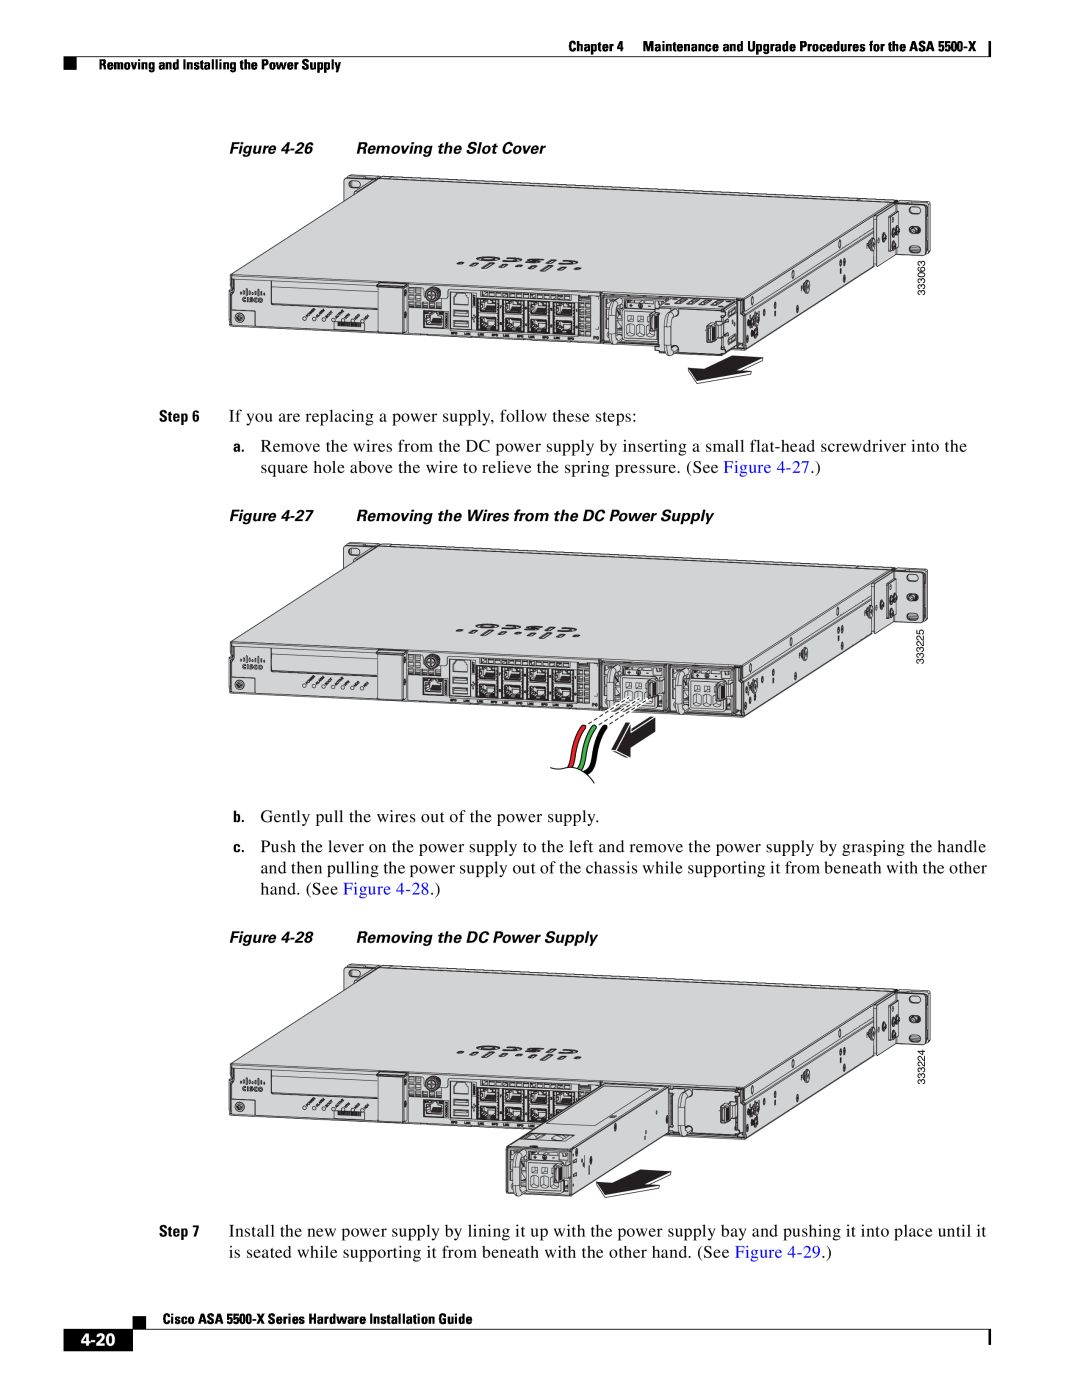 Cisco Systems ASA5555IPSK9, ASA5515K9, kygjygcjgf manual 4-20, If you are replacing a power supply, follow these steps 